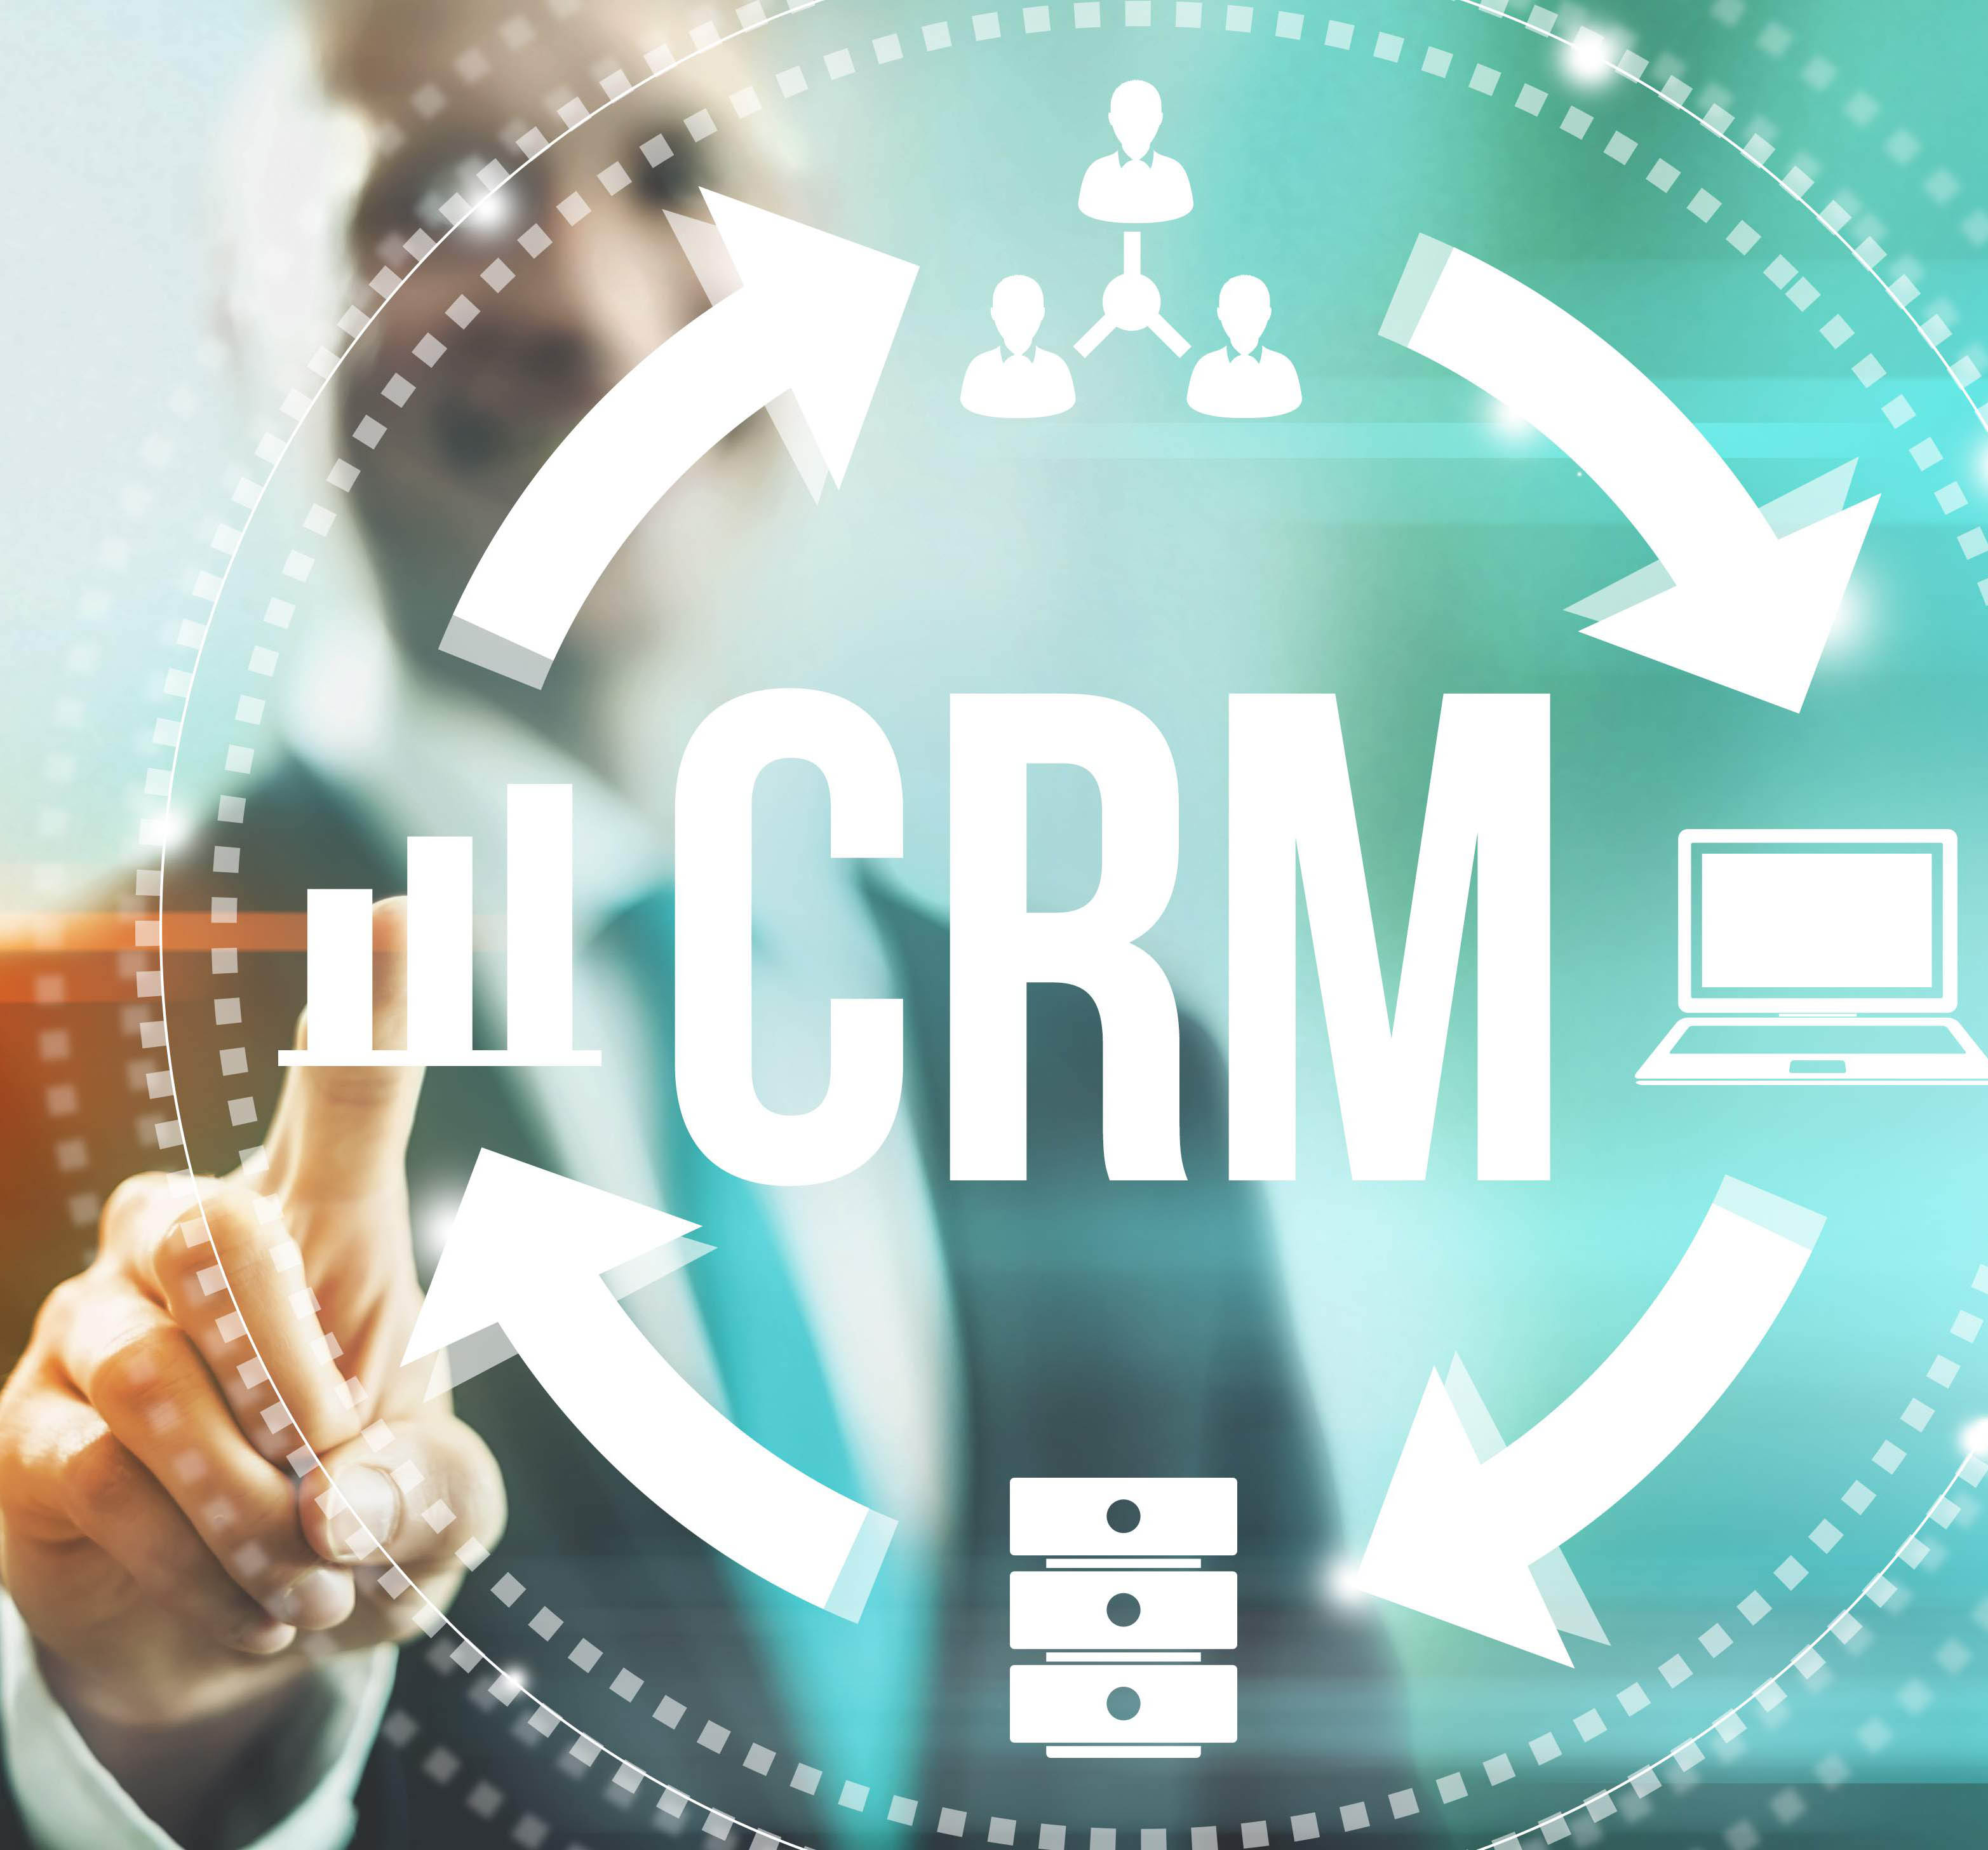 crm development services, crm application development, custom crm development, dynamic crm solutions, crm development companies in india, php crm system, crm software development company, crm software development india, crm developersabout